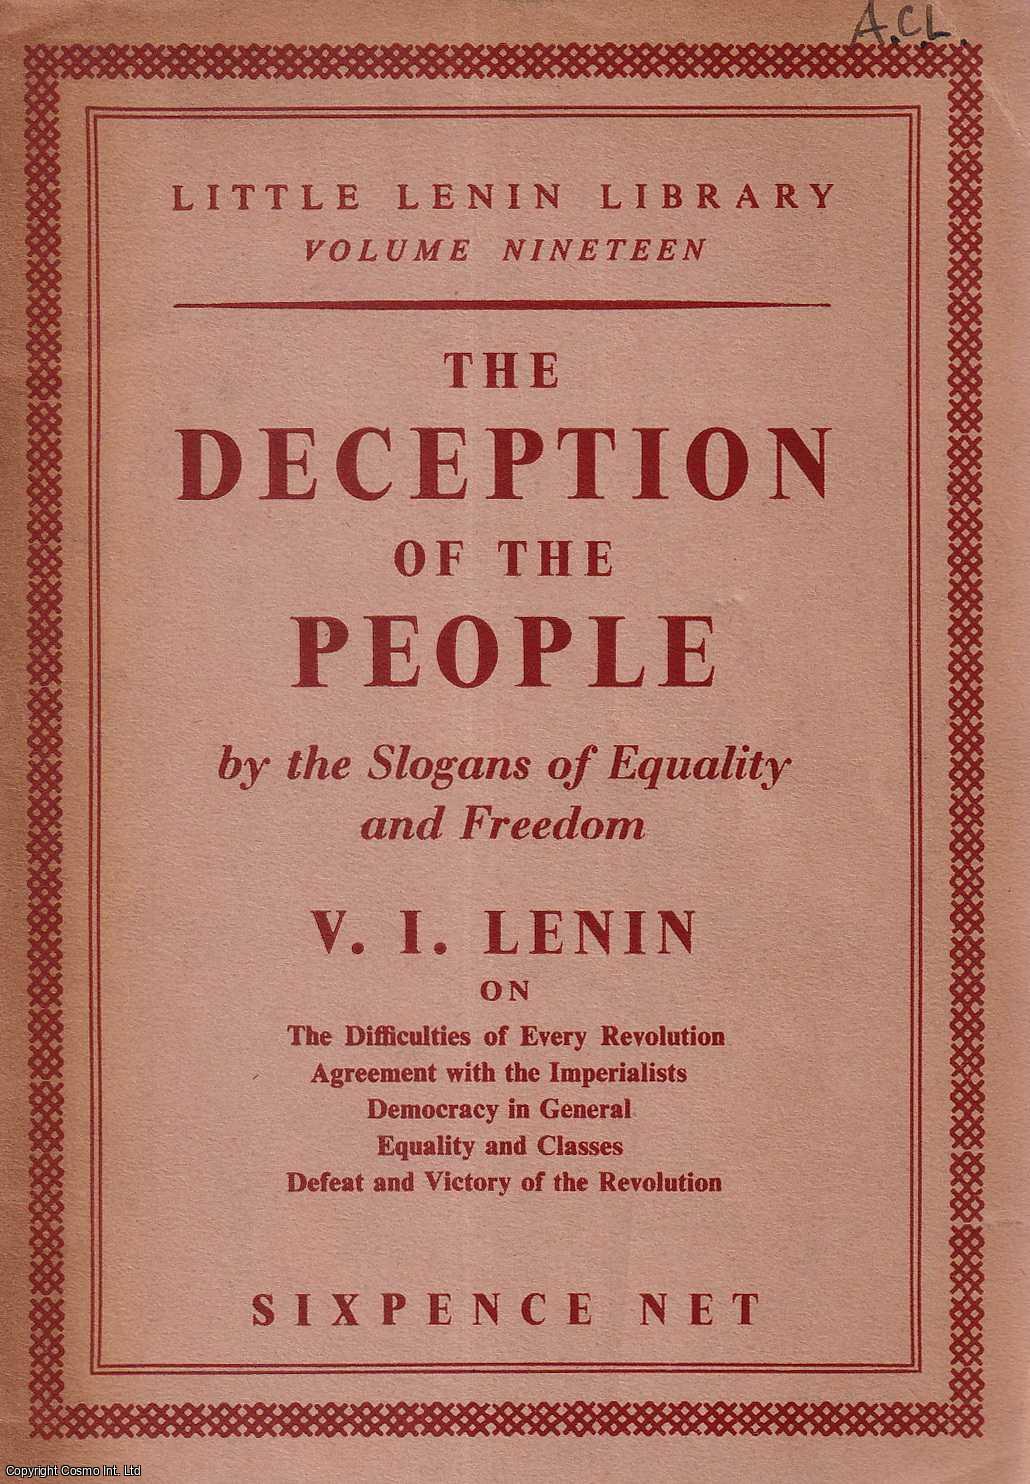 V.I. Lenin - The Deception of the People by the Slogans of Equality and Freedom. Little Lenin Library Vol. 19. Published by Little Lenin Library 1940.